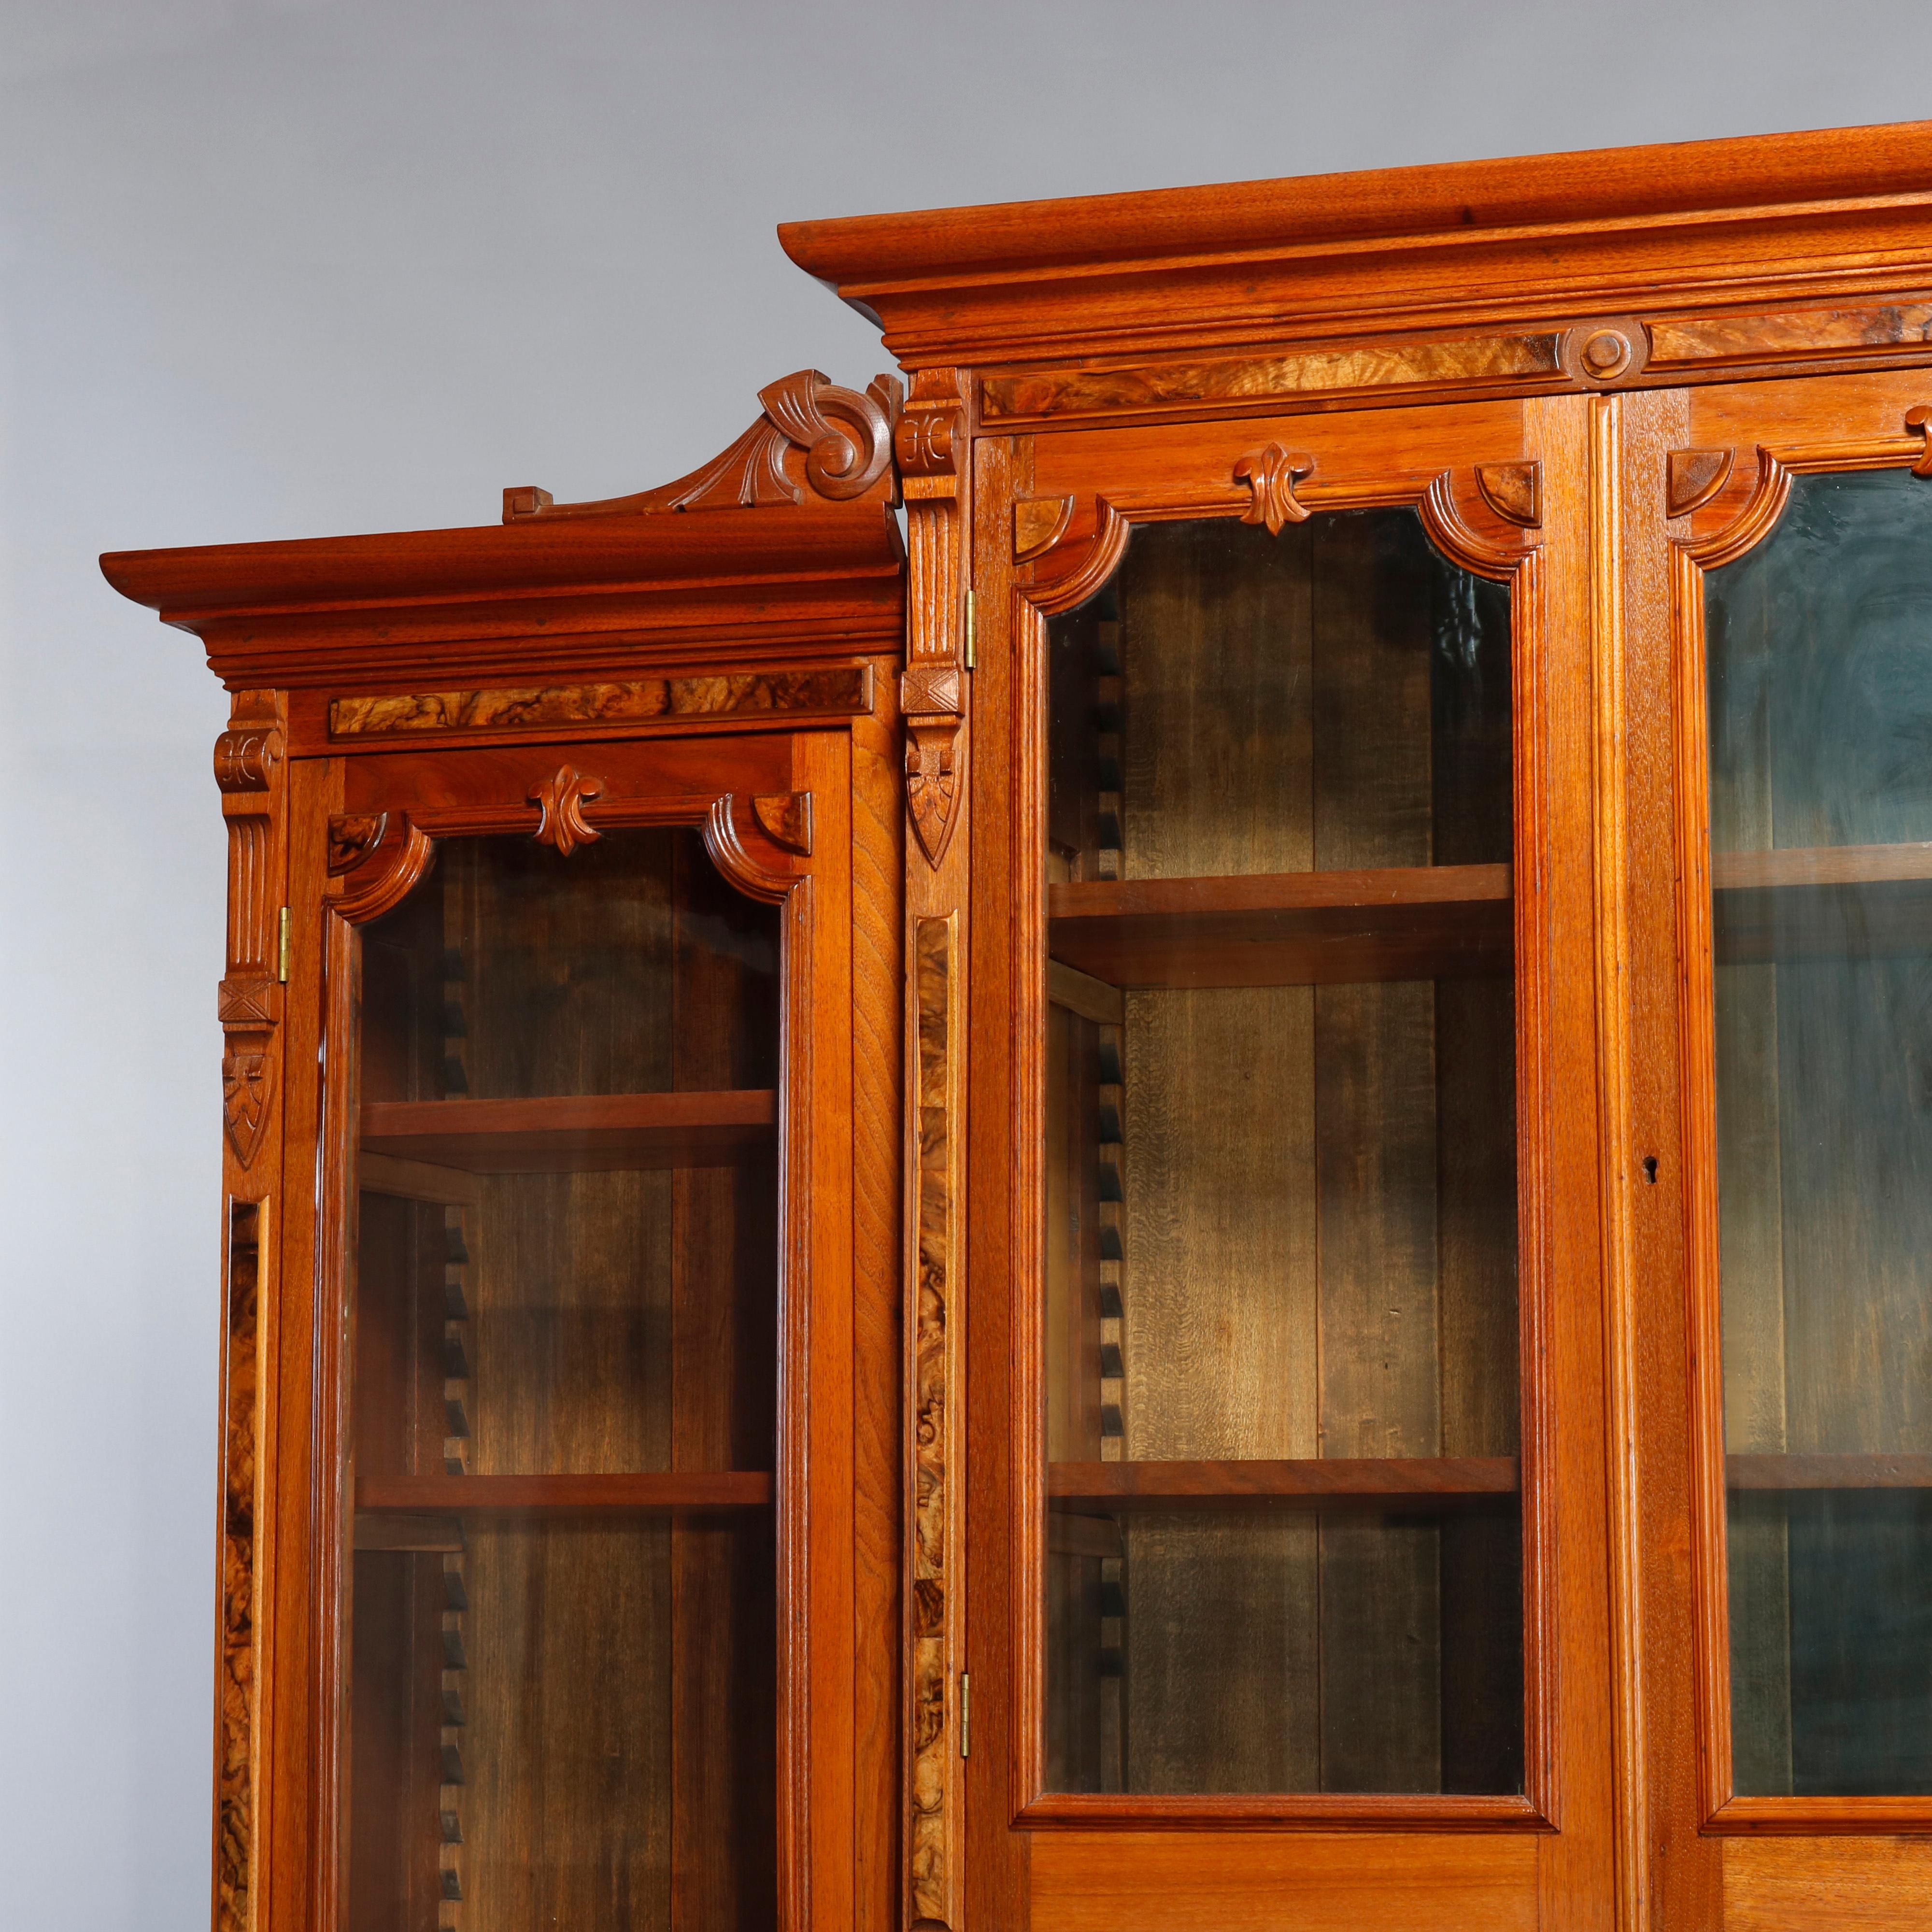 An antique and monumental Eastlake step-back secretary bookcase offers carved walnut and burl construction with central case having upper bookcase with double glass doors over drop front desk and drawer tower, flanked by set back tall bookcases each